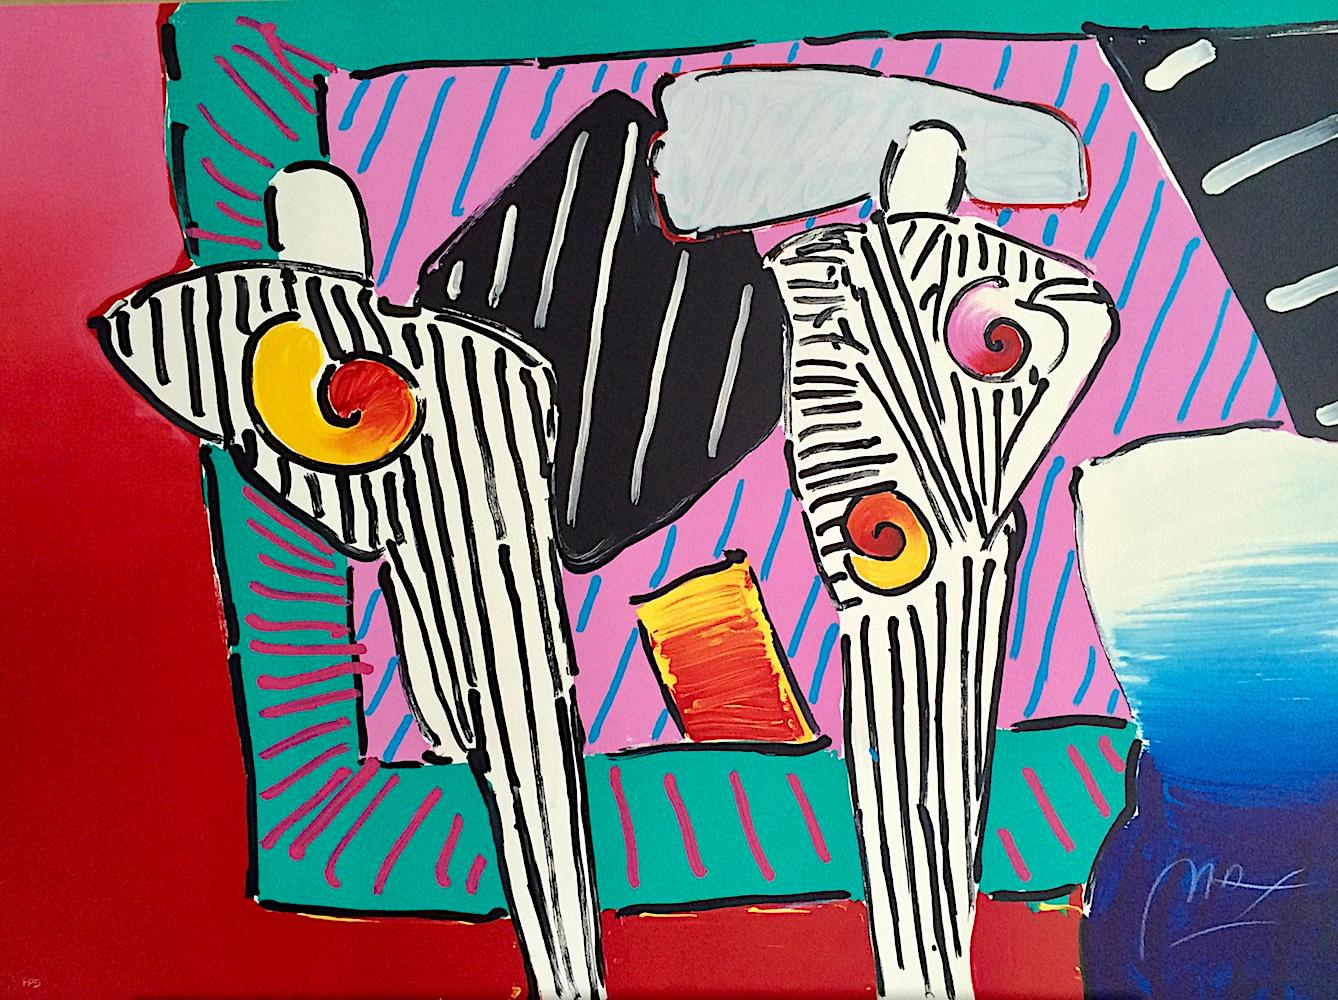 Peter Max Interior Print - TIMELINE DEGA MAN Signed Lithograph, Abstract Portrait Black White Stripe Robes